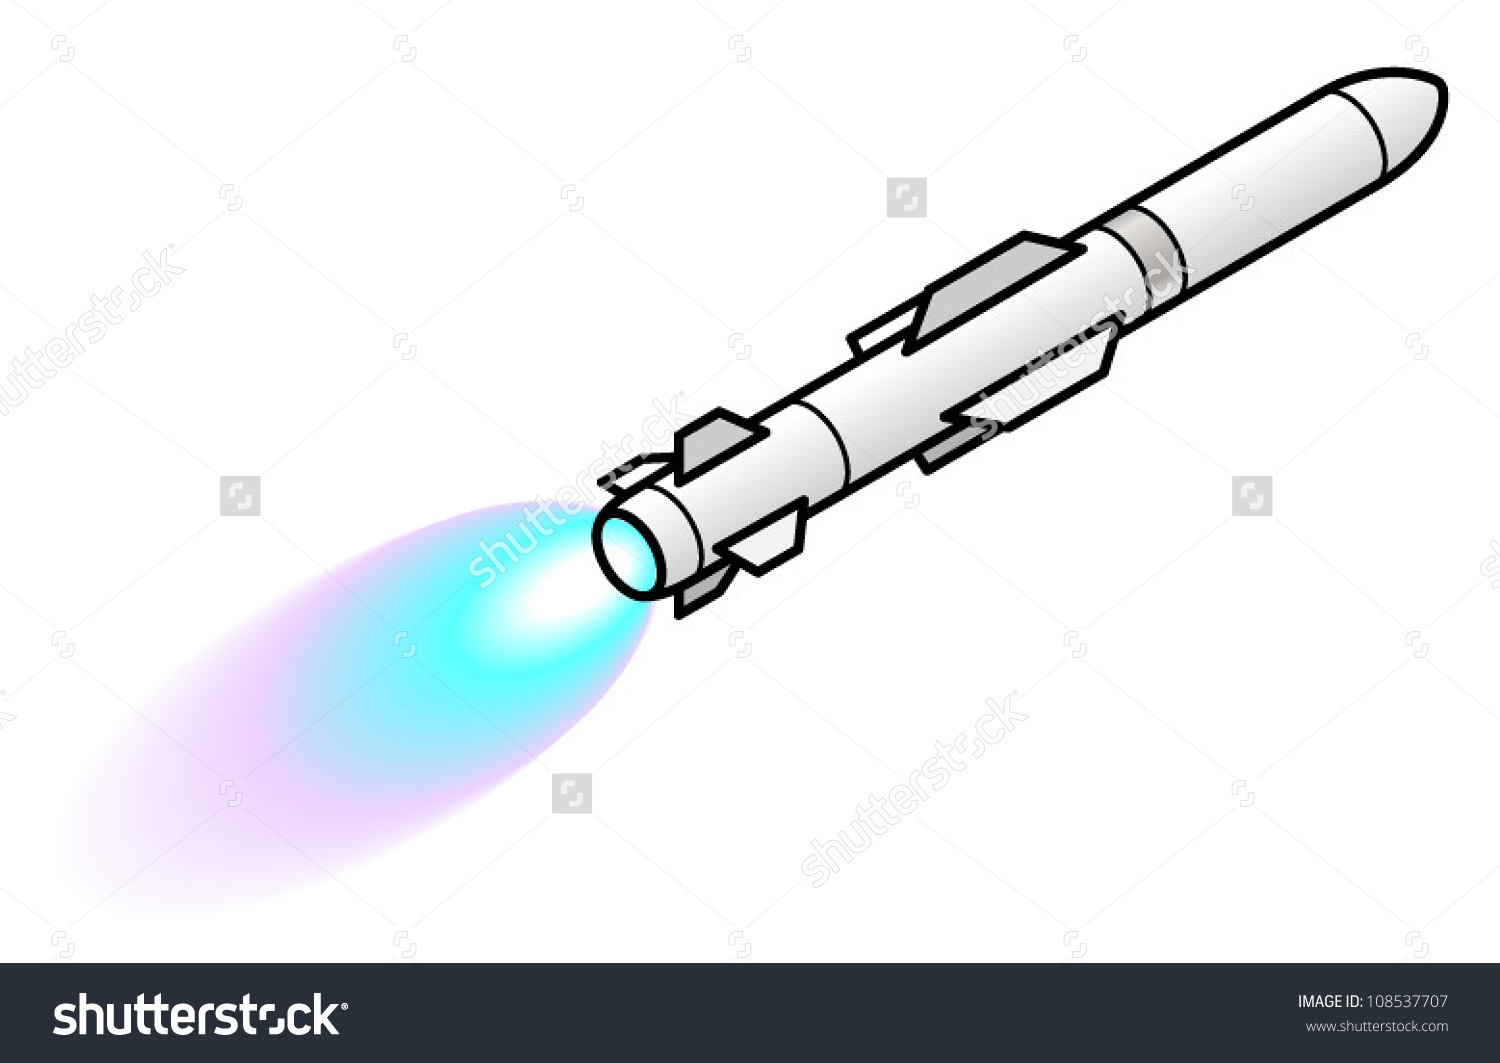 Missile Flight Blue Flame Stock Vector 108537707.